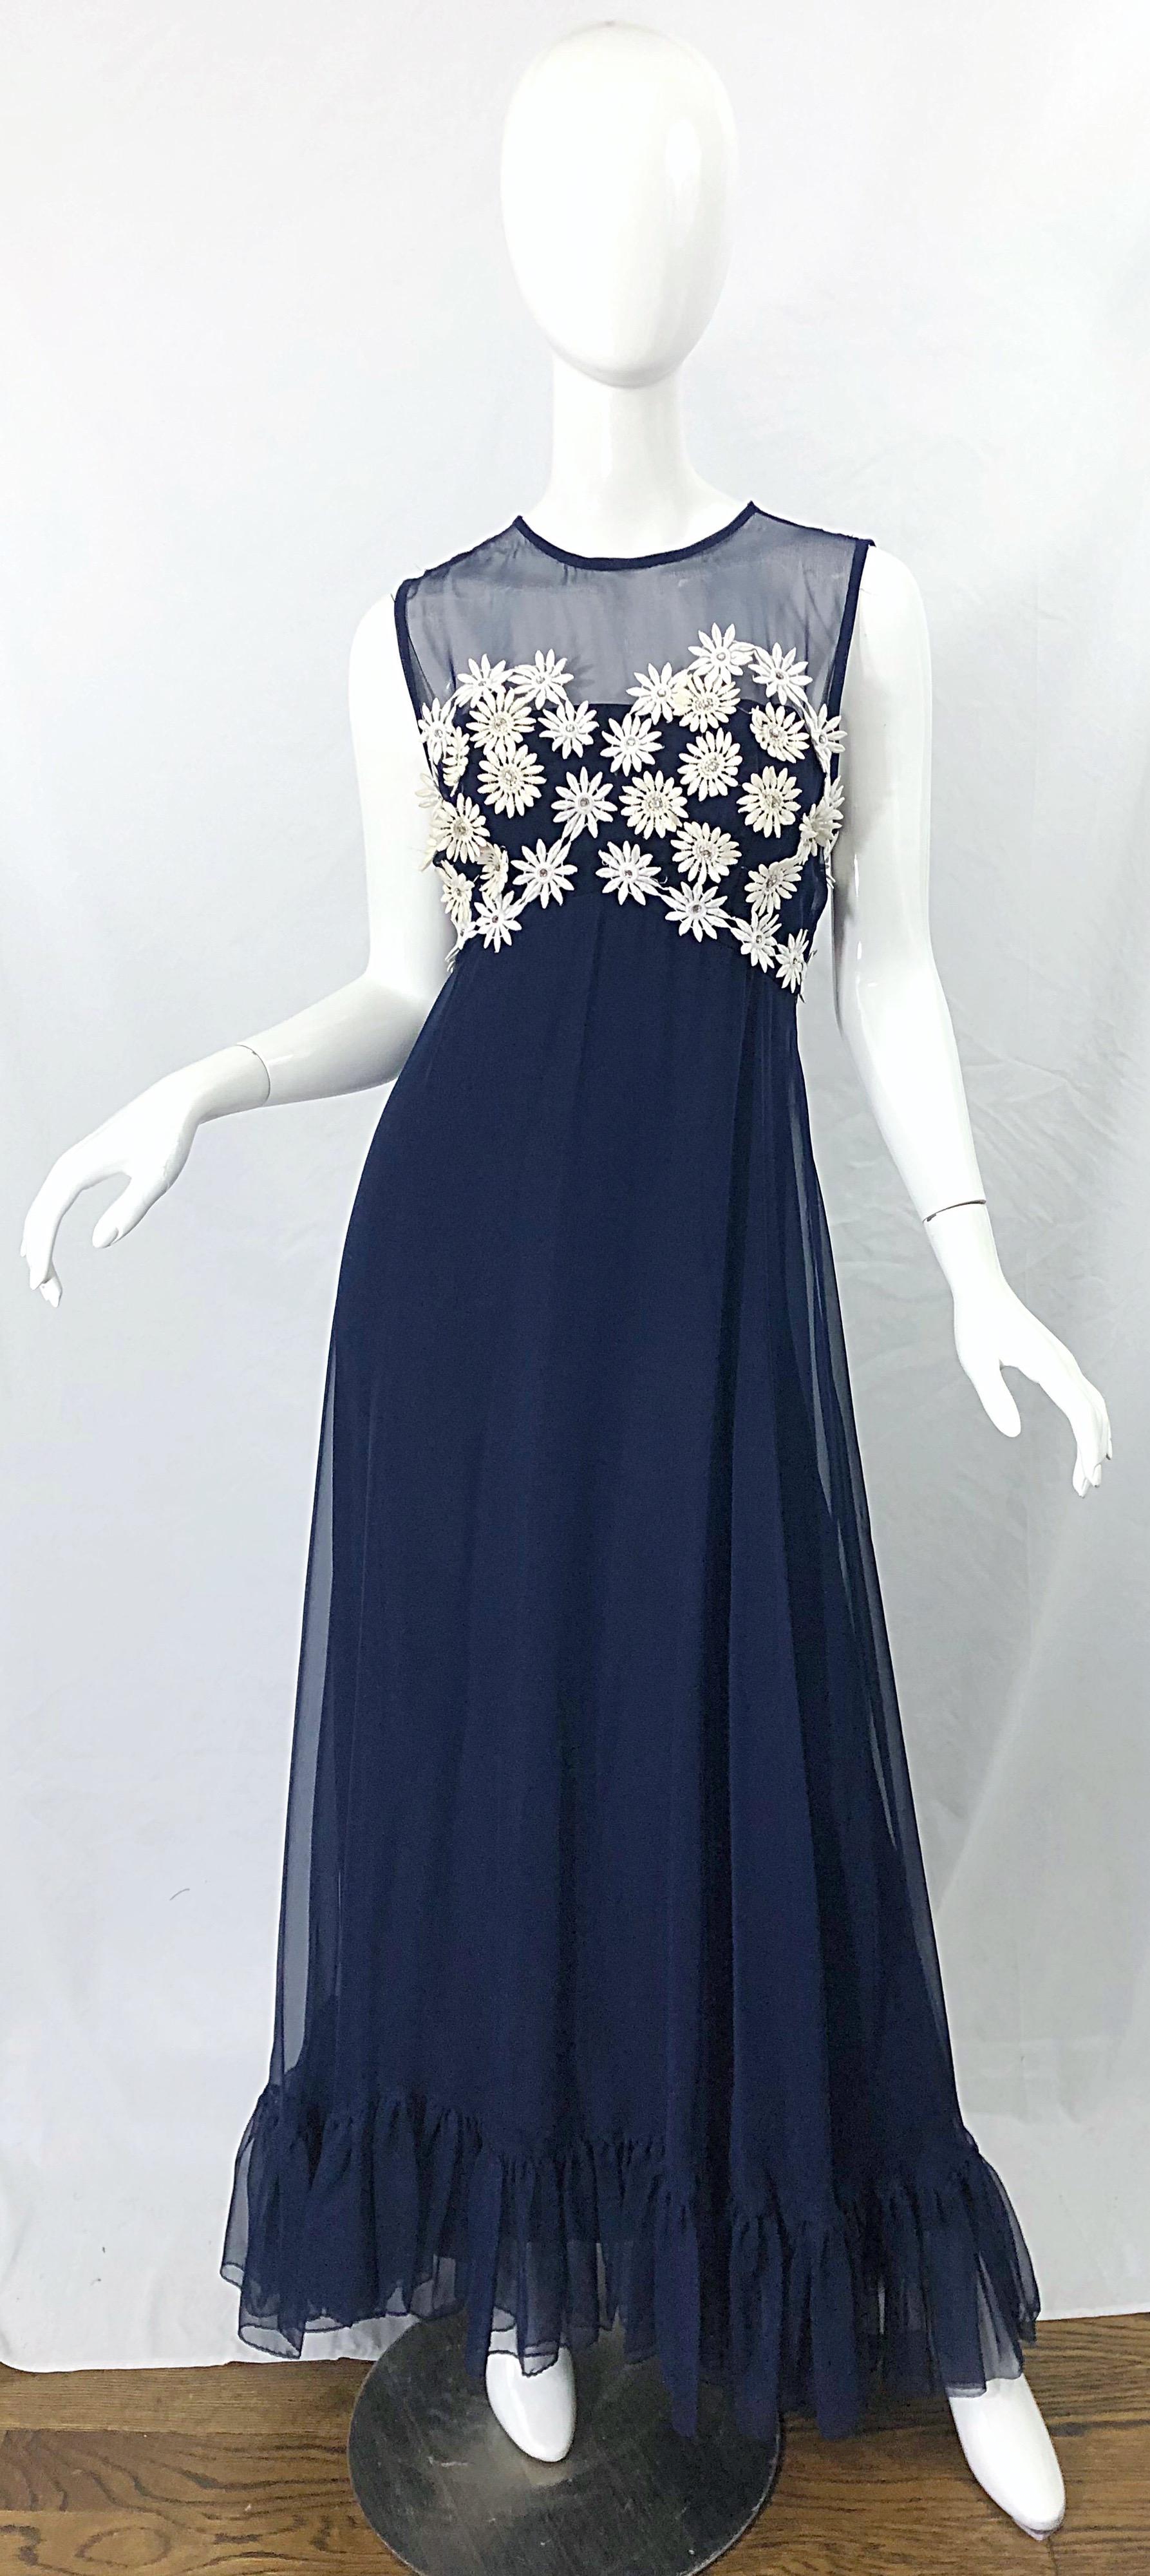 Beautiful 1960s navy blue and white silk chiffon flower rhinestone applique gown ! Features a tailored bodice with hand-sewn white flowers that are encrusted with rhinestones. Sheer neck and back. Full metal zipper up the back with hook-and-eye